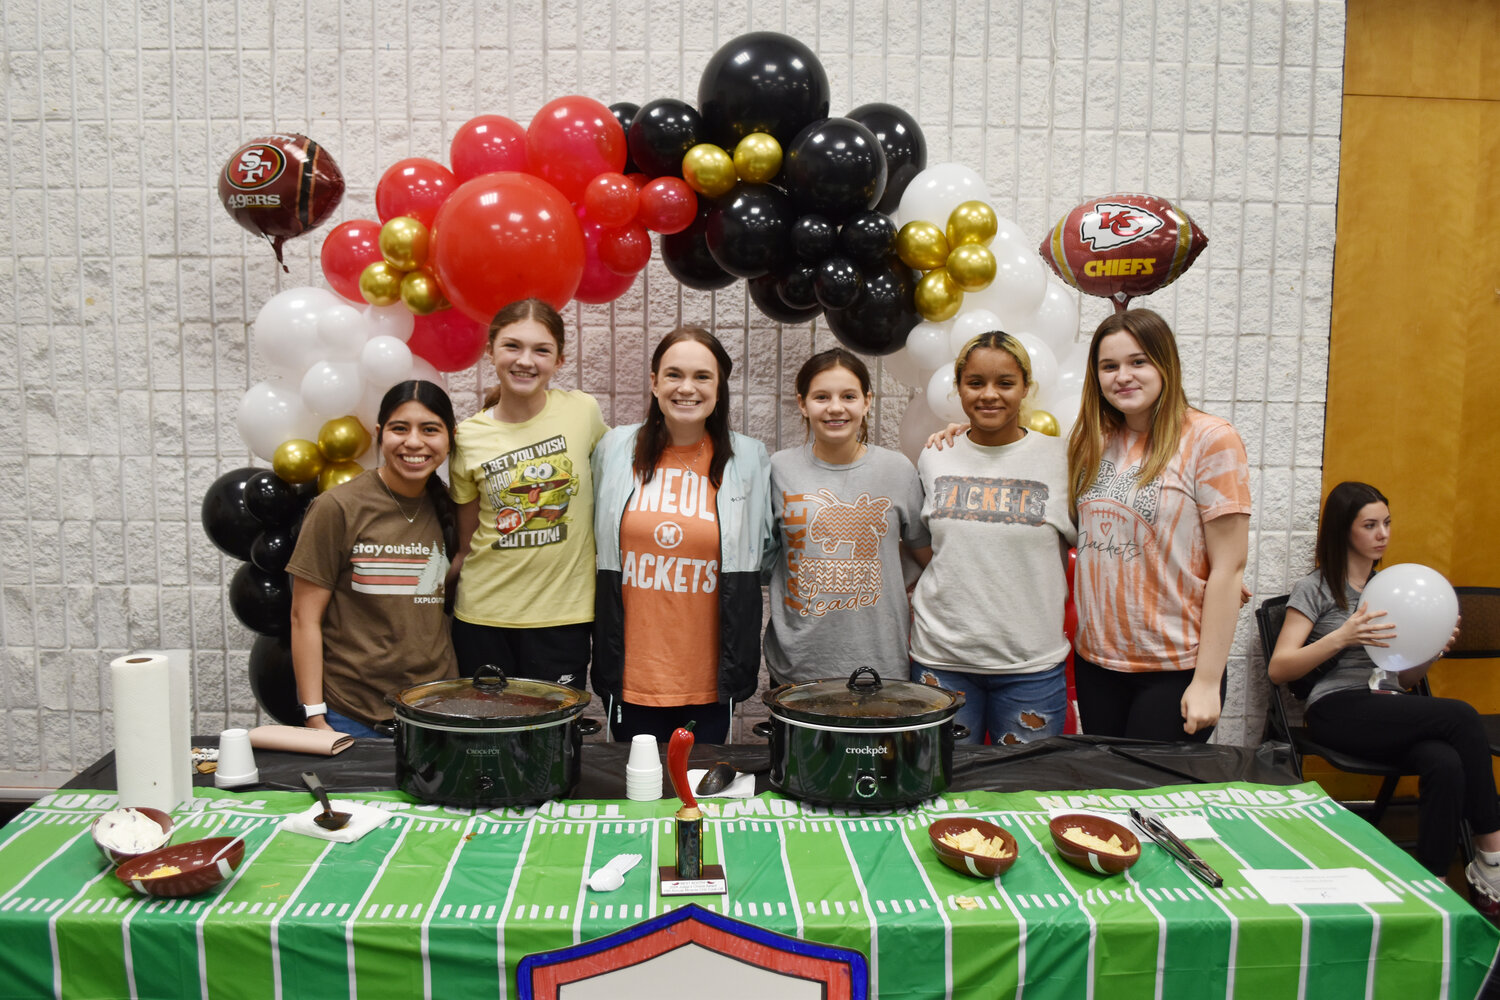 The Mineola Middle School Builders Club won the booth decorting contest at the annual Mineola Kiwanis Club chili cookoff Saturday. The service club is sponsored by Kiwanis. Manning the booth were, from left, Ashley Ventura, Shayleigh Threlkeld, Mrs. Cameron Stack, Emberly Weatherford, Kristasia Rossie and Ava Halbert. The People’s Choice award went to Bobby Tucker for Constable for raising the most tips.